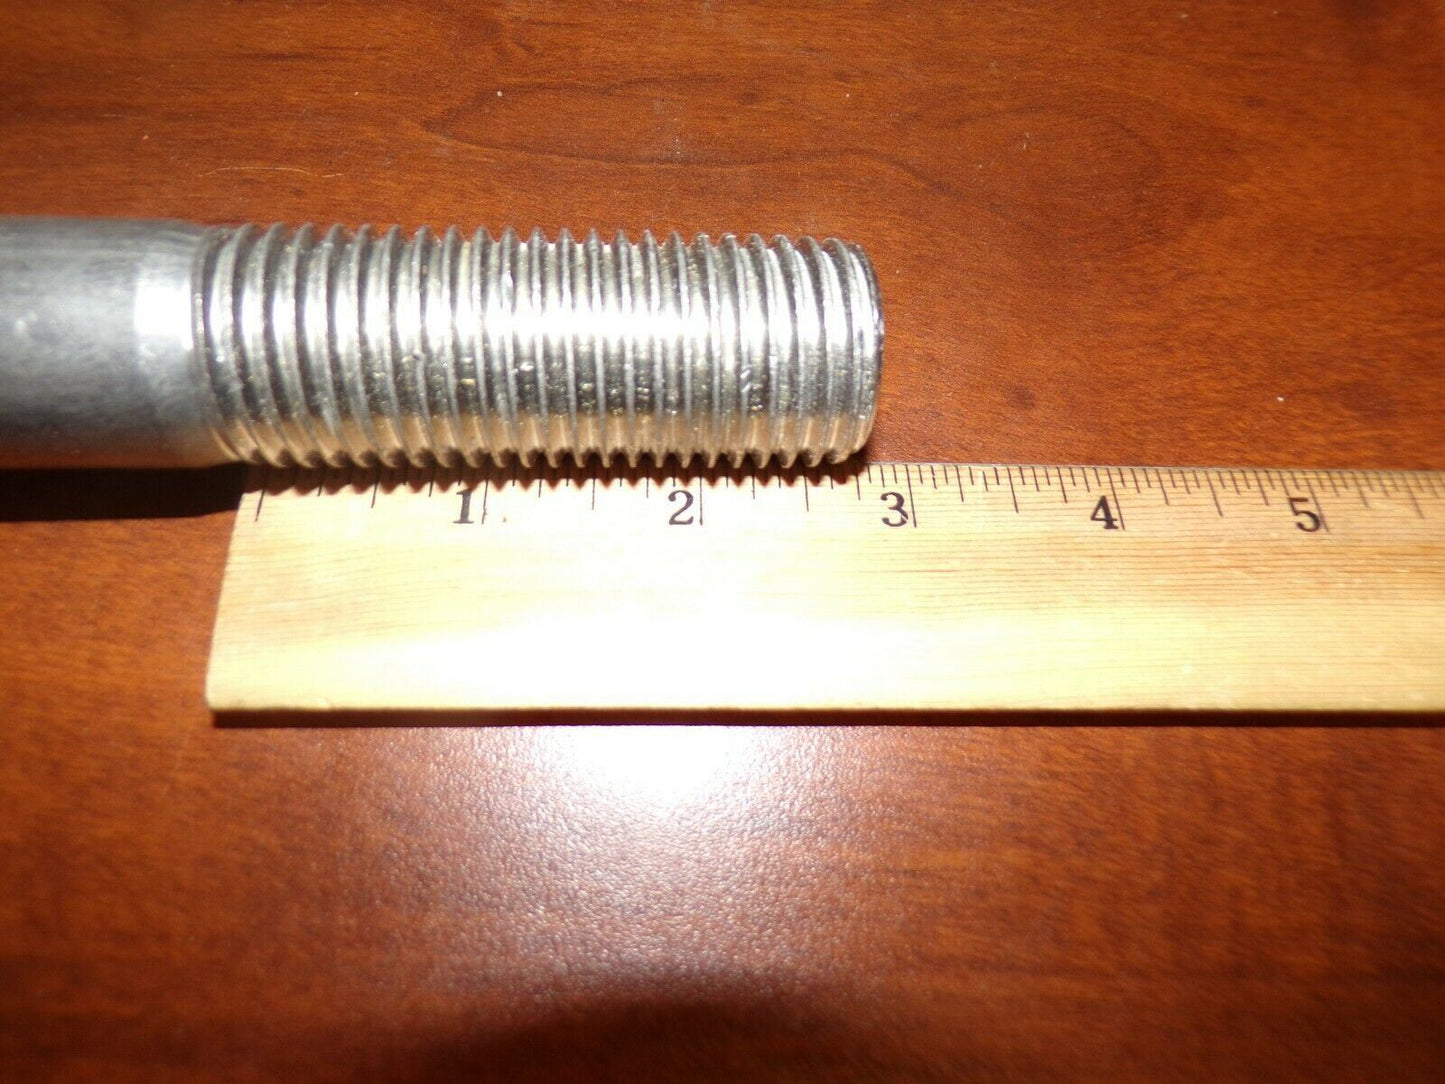 3pk, HEX HEAD BOLT ISO 4014 STAINLESS STEEL A2 RIGHT M27X180 (183785651555-NBT12)